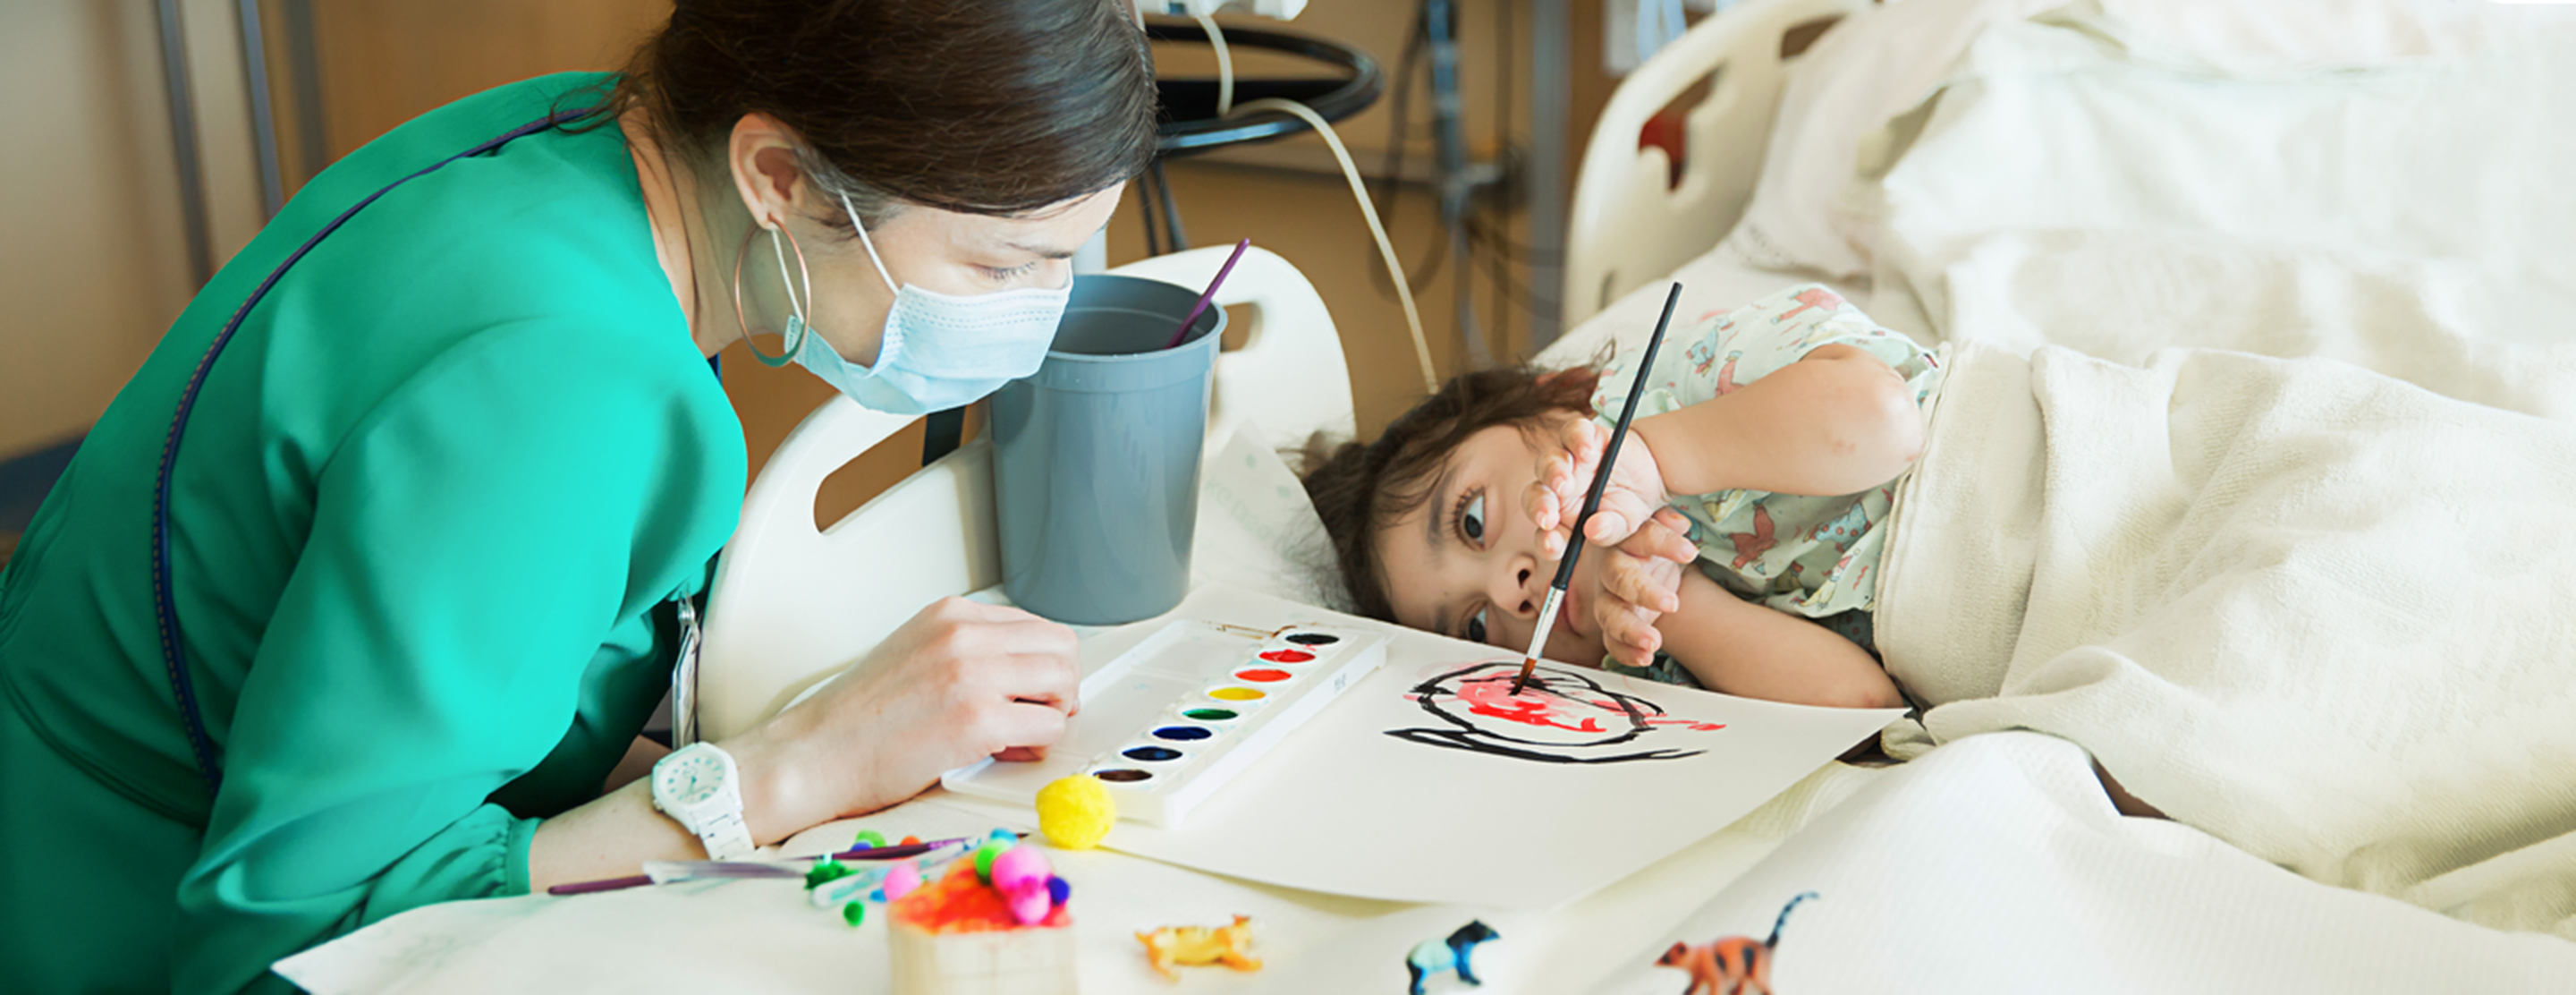 Best Practices for Using Art Supplies Hygienically during the COVID-19  Outbreak - American Art Therapy Association